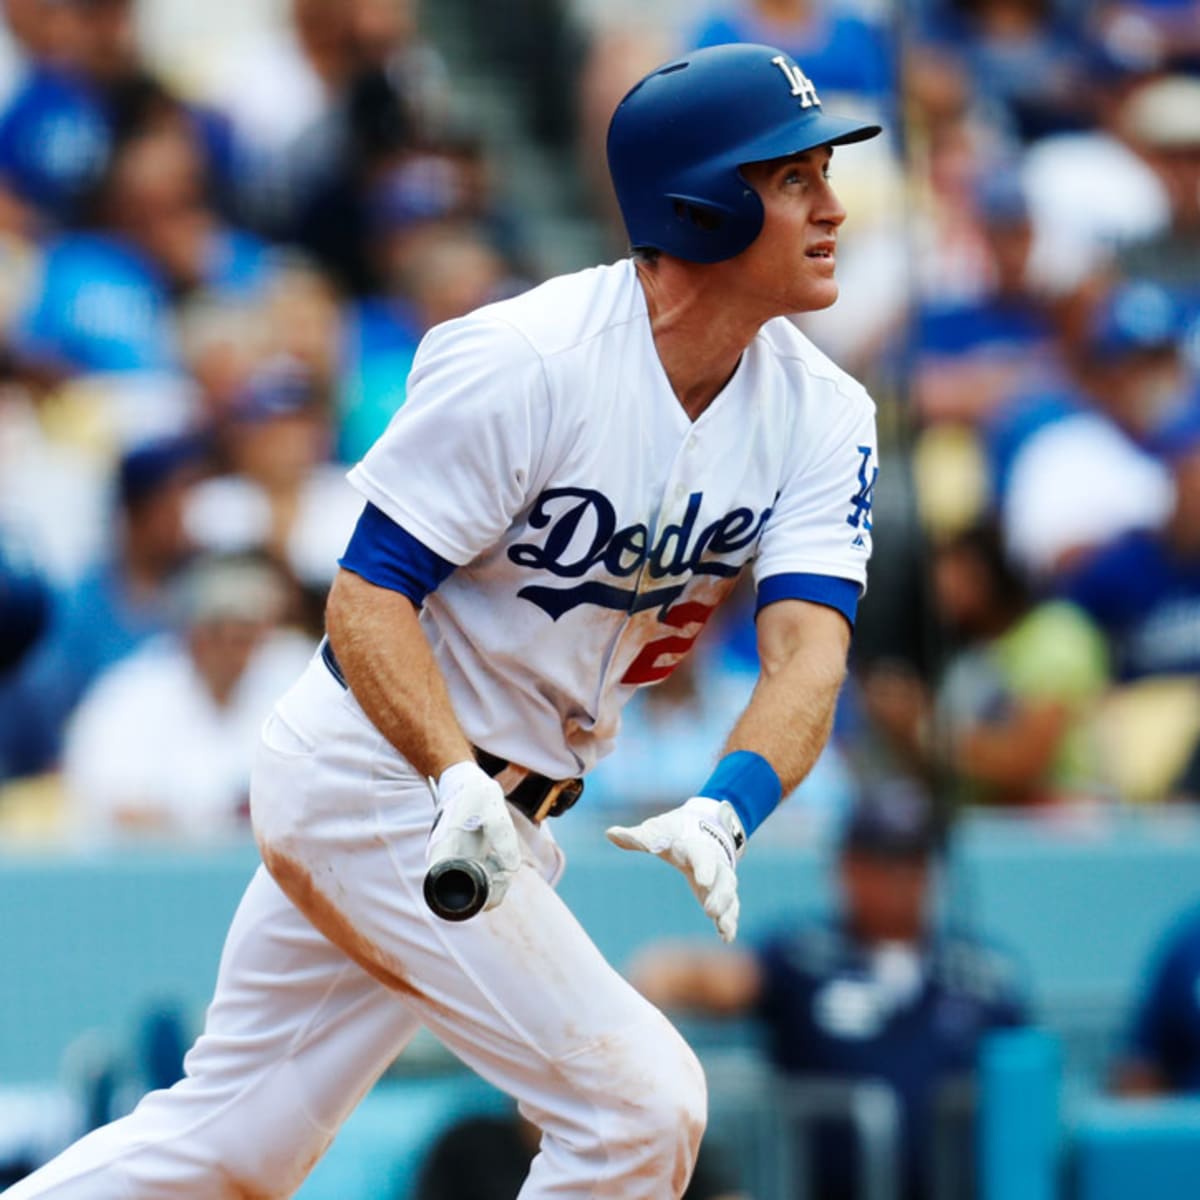 Chase Utley is still underrated despite his 1,000 career RBIs